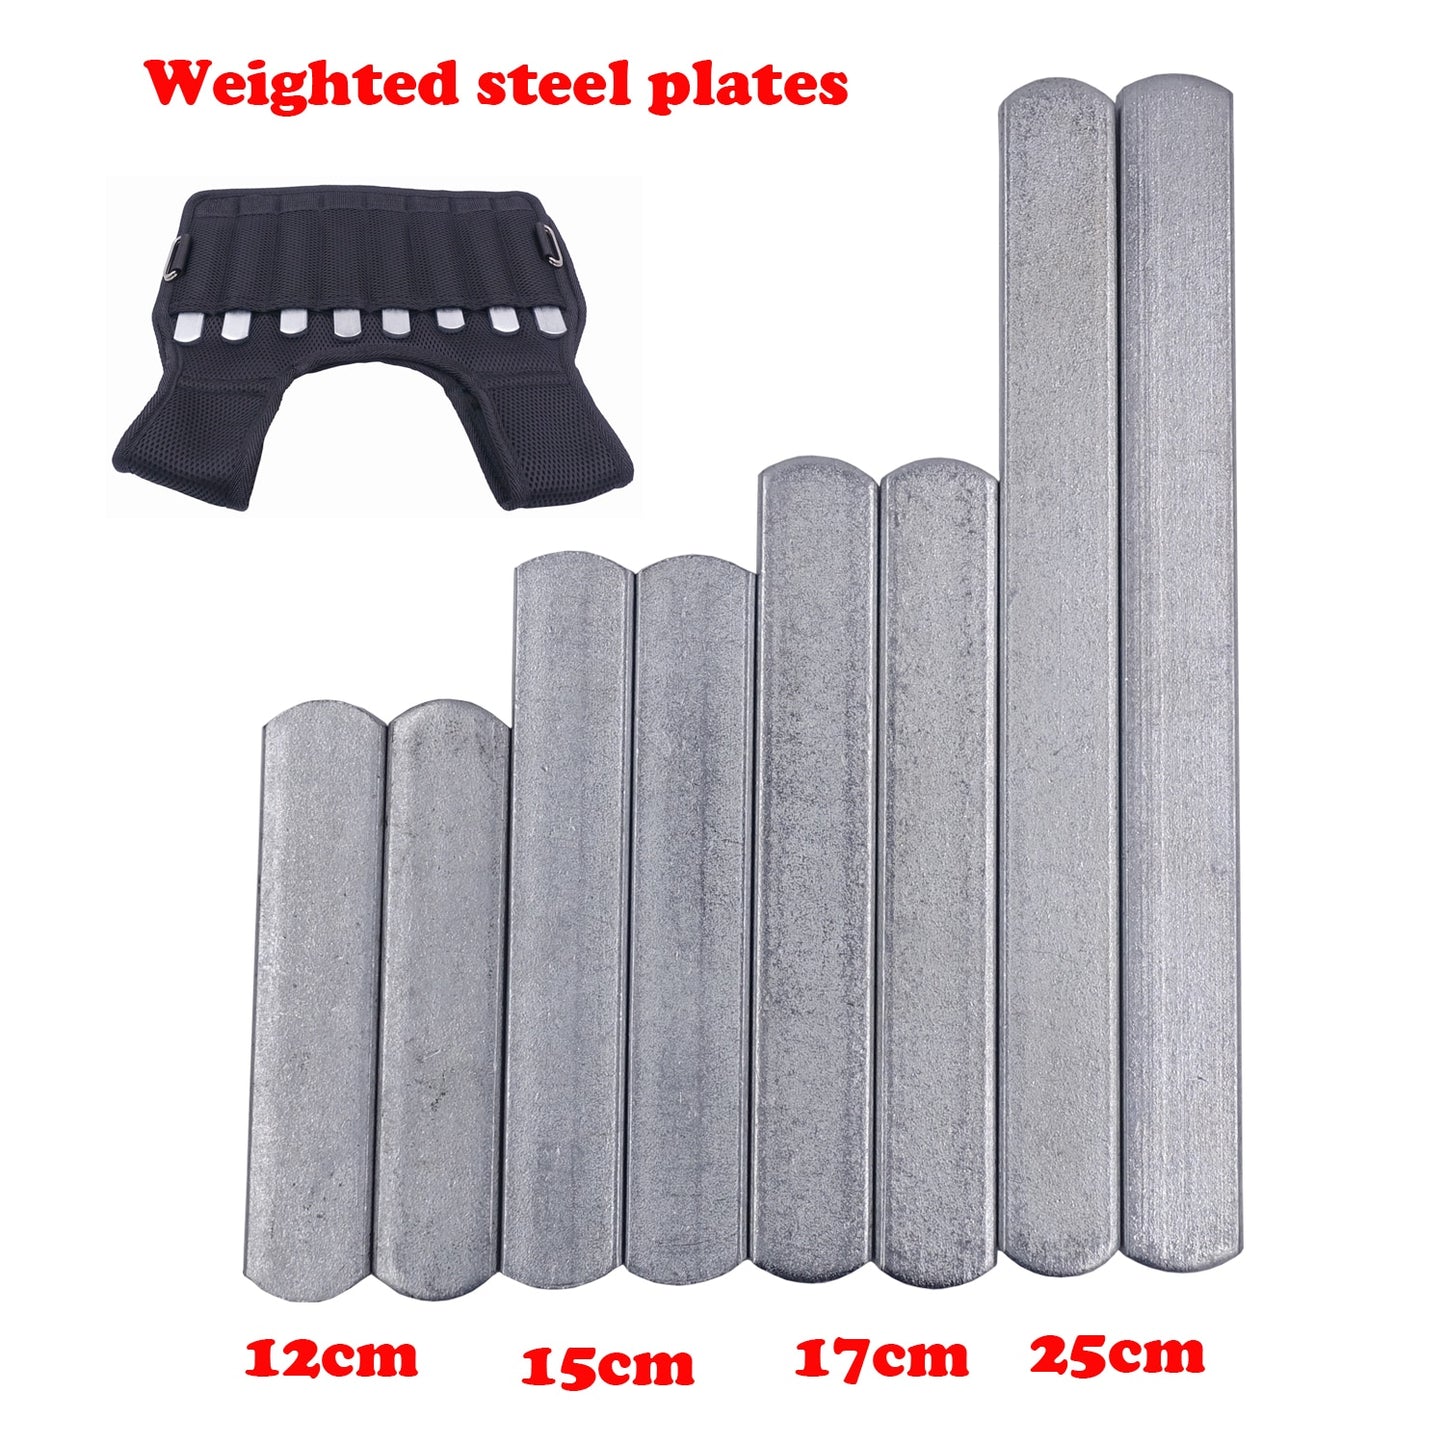 Our premium stainless steel Weighted Vest Weights are made especially for weighted vest, leg or arm straps. With our various sizes and weights this lets you customize your weighted vest, leg or arm straps to your desired weight. The stainless steel weights are very durable, rustproof and boast a rounded edge design for safety. 